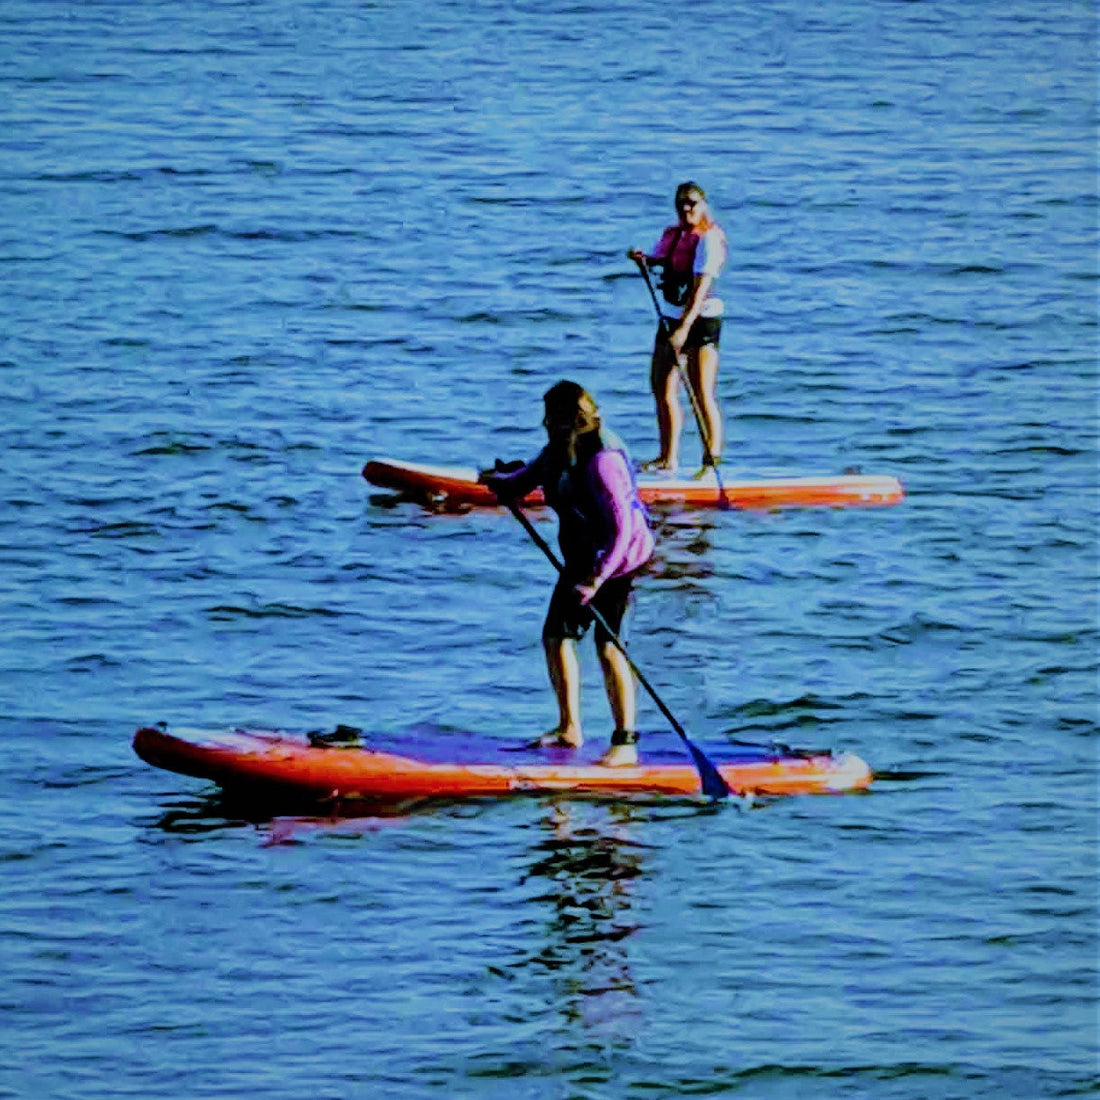  Two beginner Paddle boarders out on the ocean on a nice day.